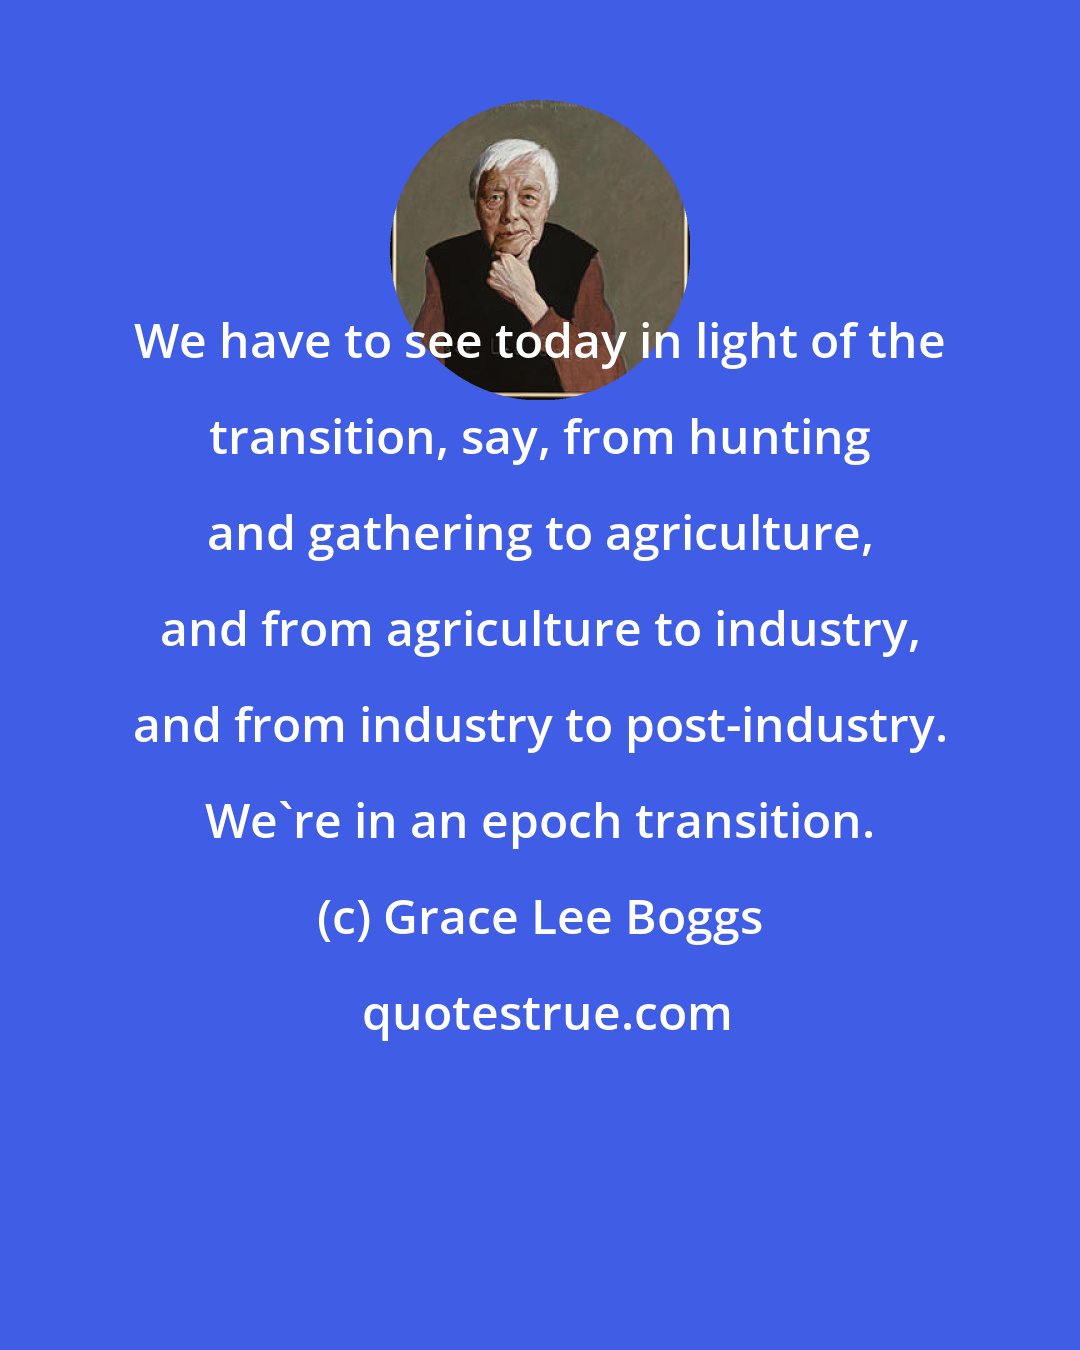 Grace Lee Boggs: We have to see today in light of the transition, say, from hunting and gathering to agriculture, and from agriculture to industry, and from industry to post-industry. We're in an epoch transition.